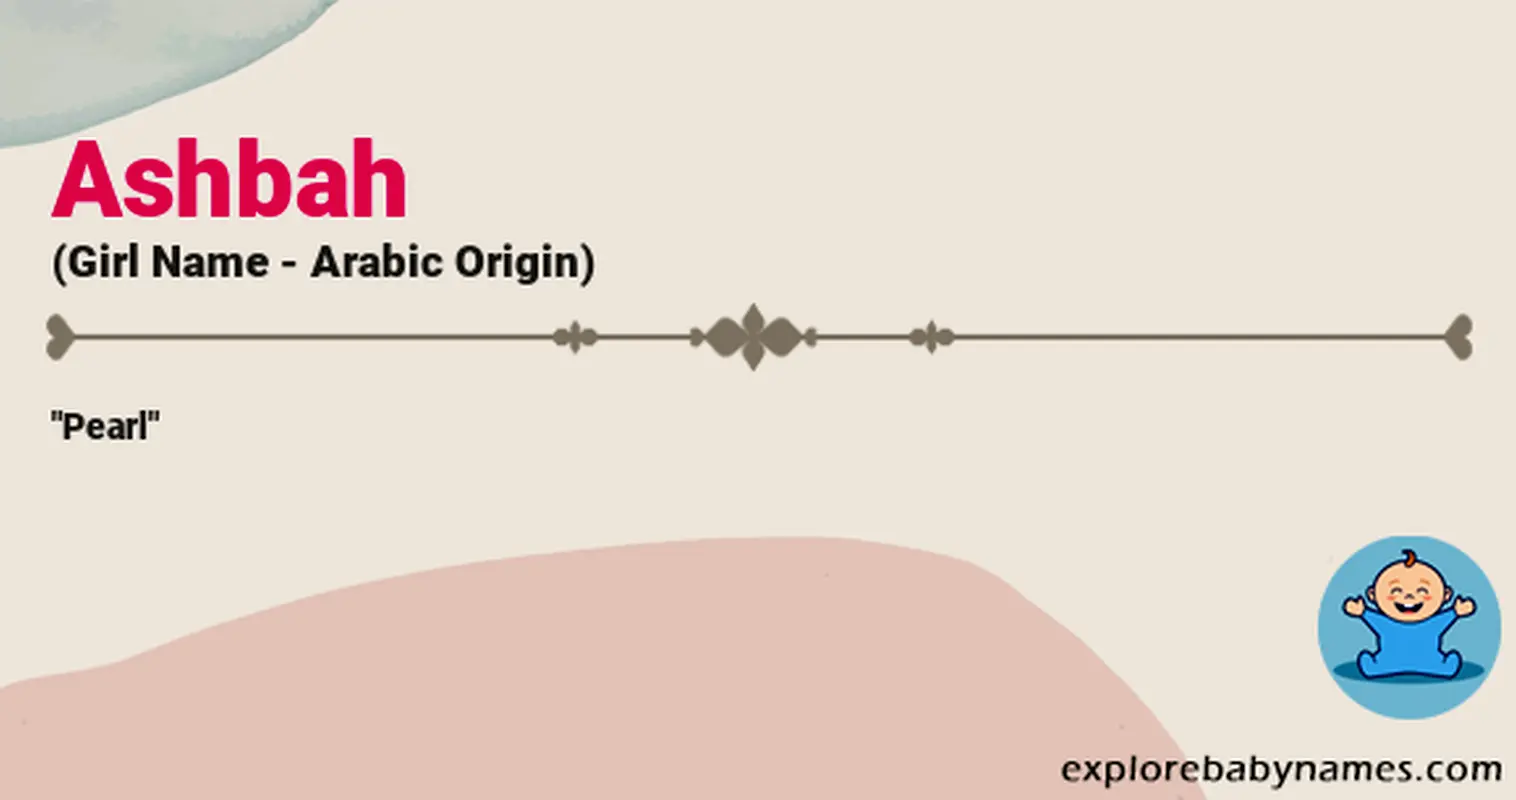 Meaning of Ashbah